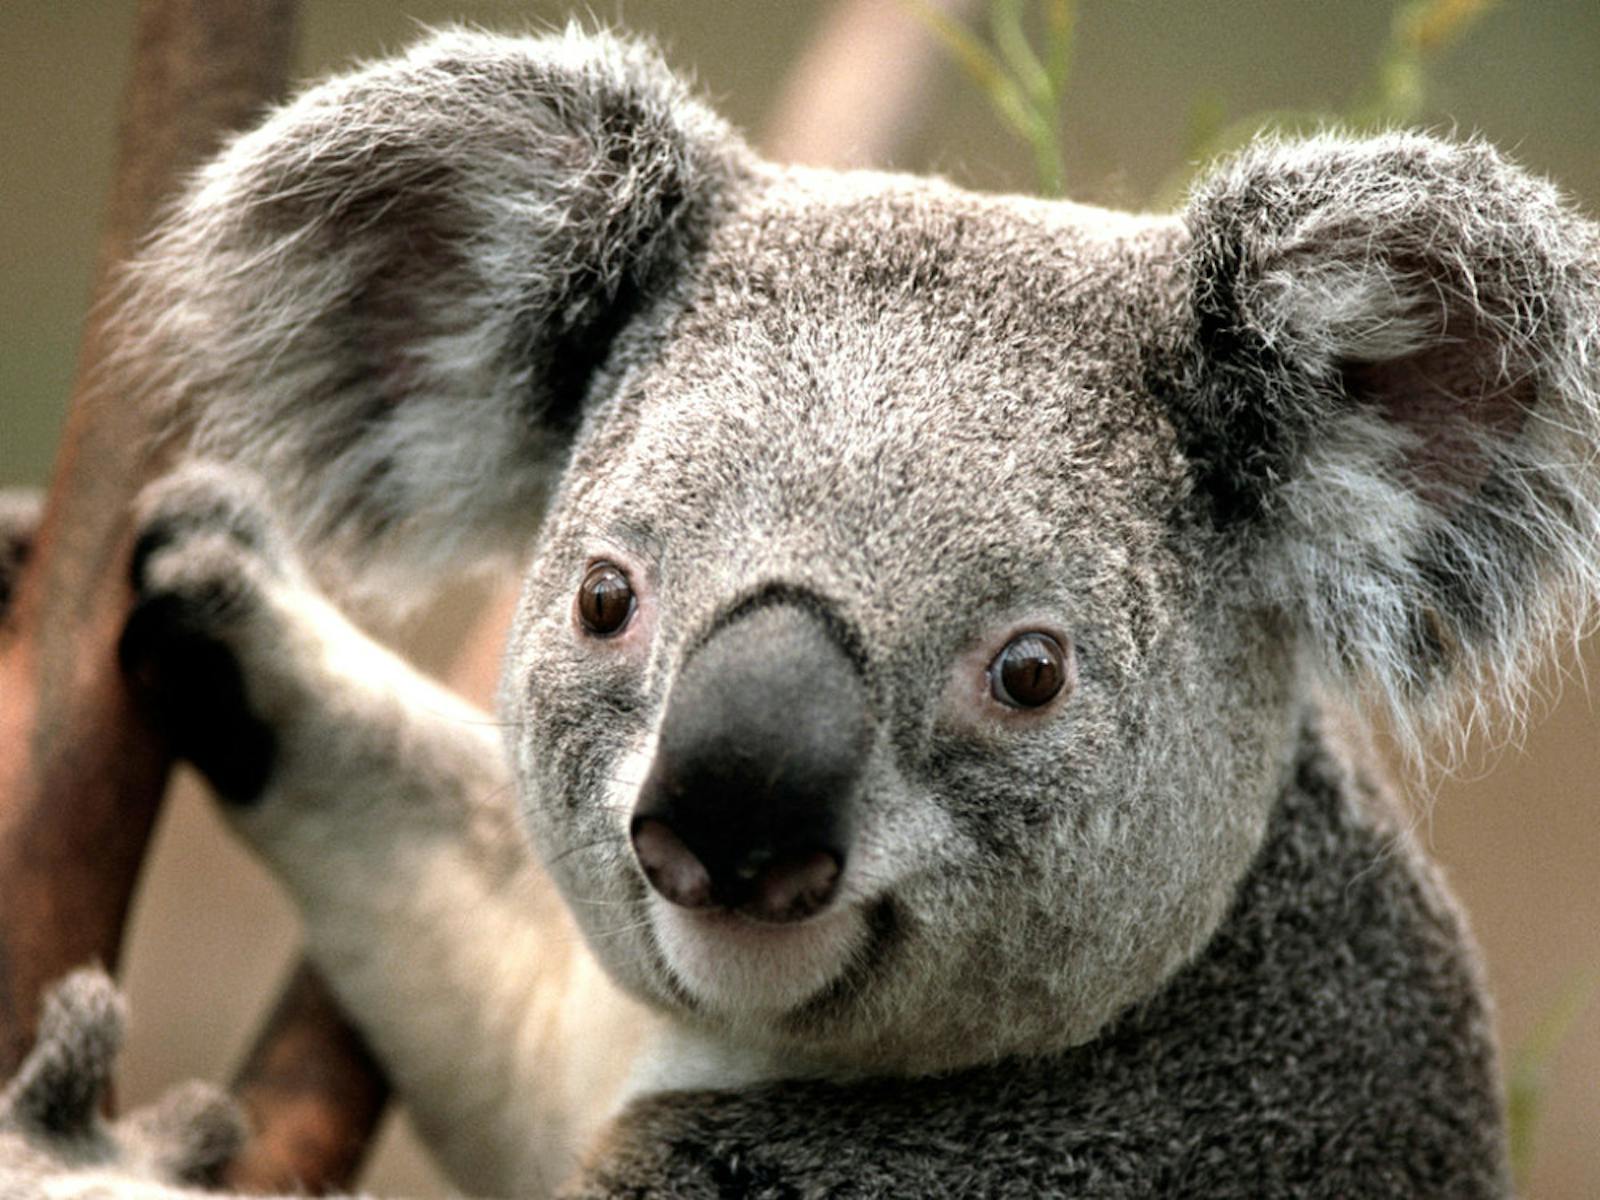 Wild koalas get chlamydia vaccine in first-of-its kind trial to